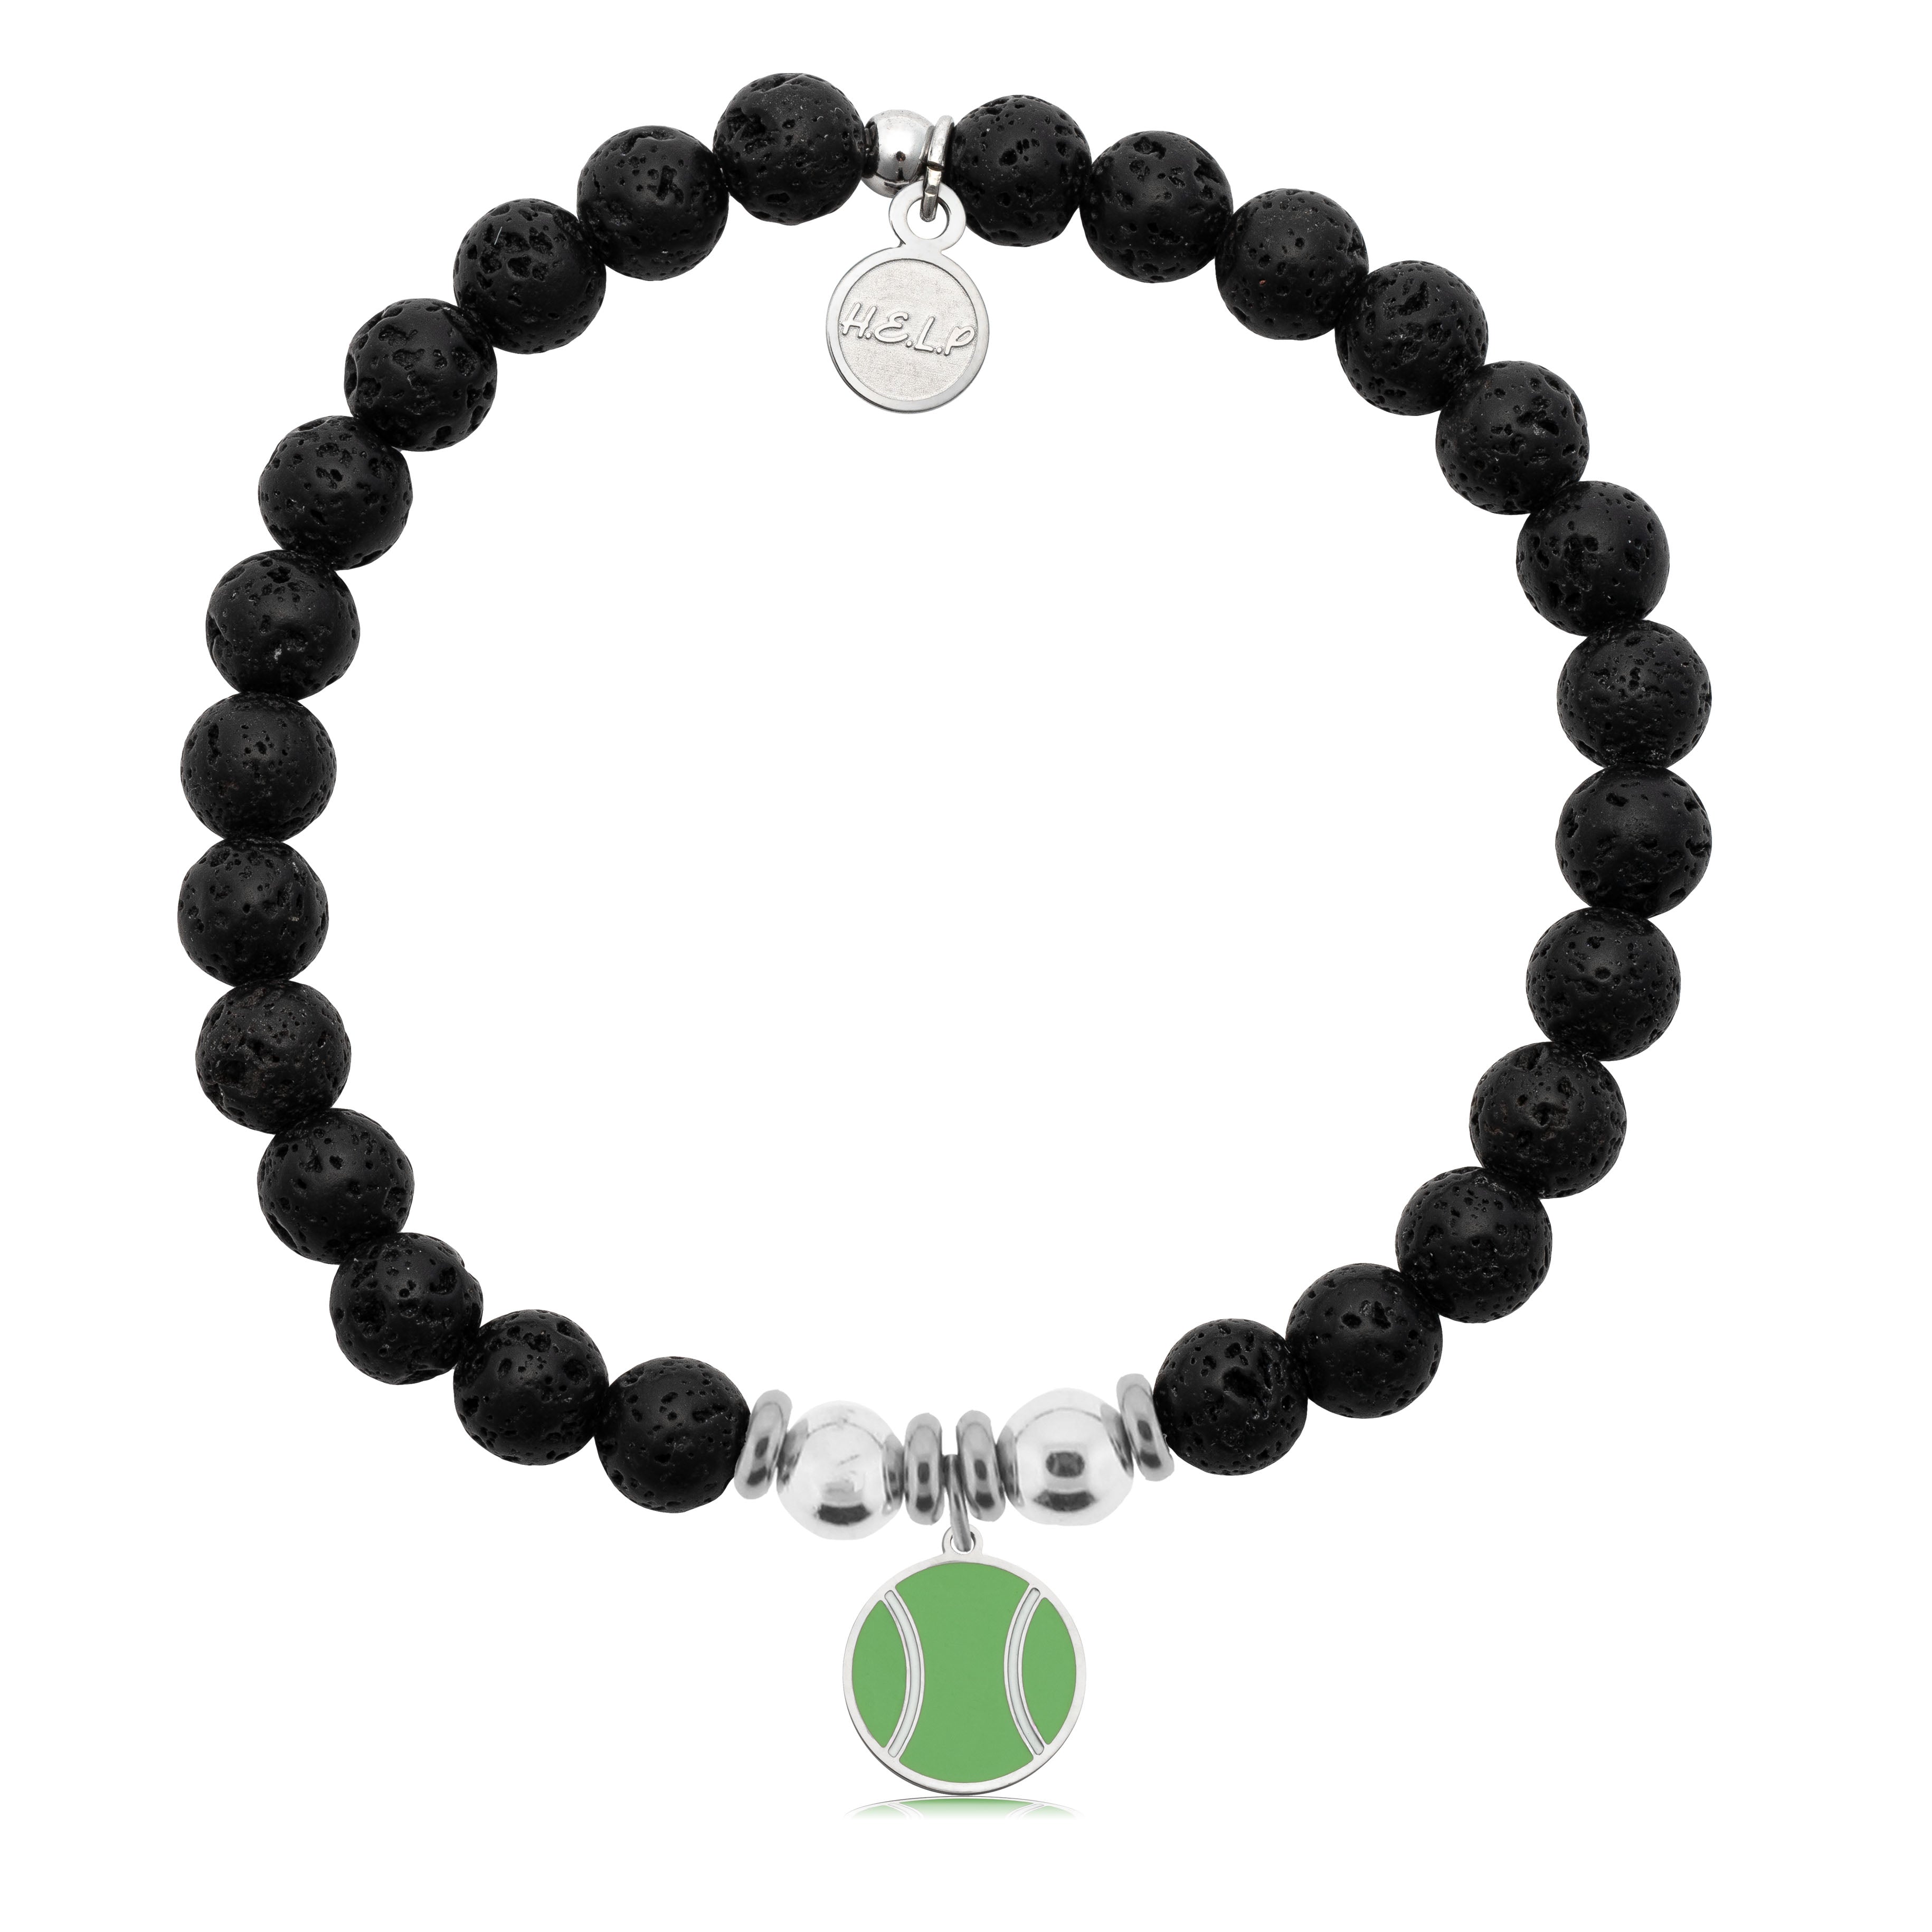 HELP by TJ Tennis Ball Charm with Lava Rock Charity Bracelet